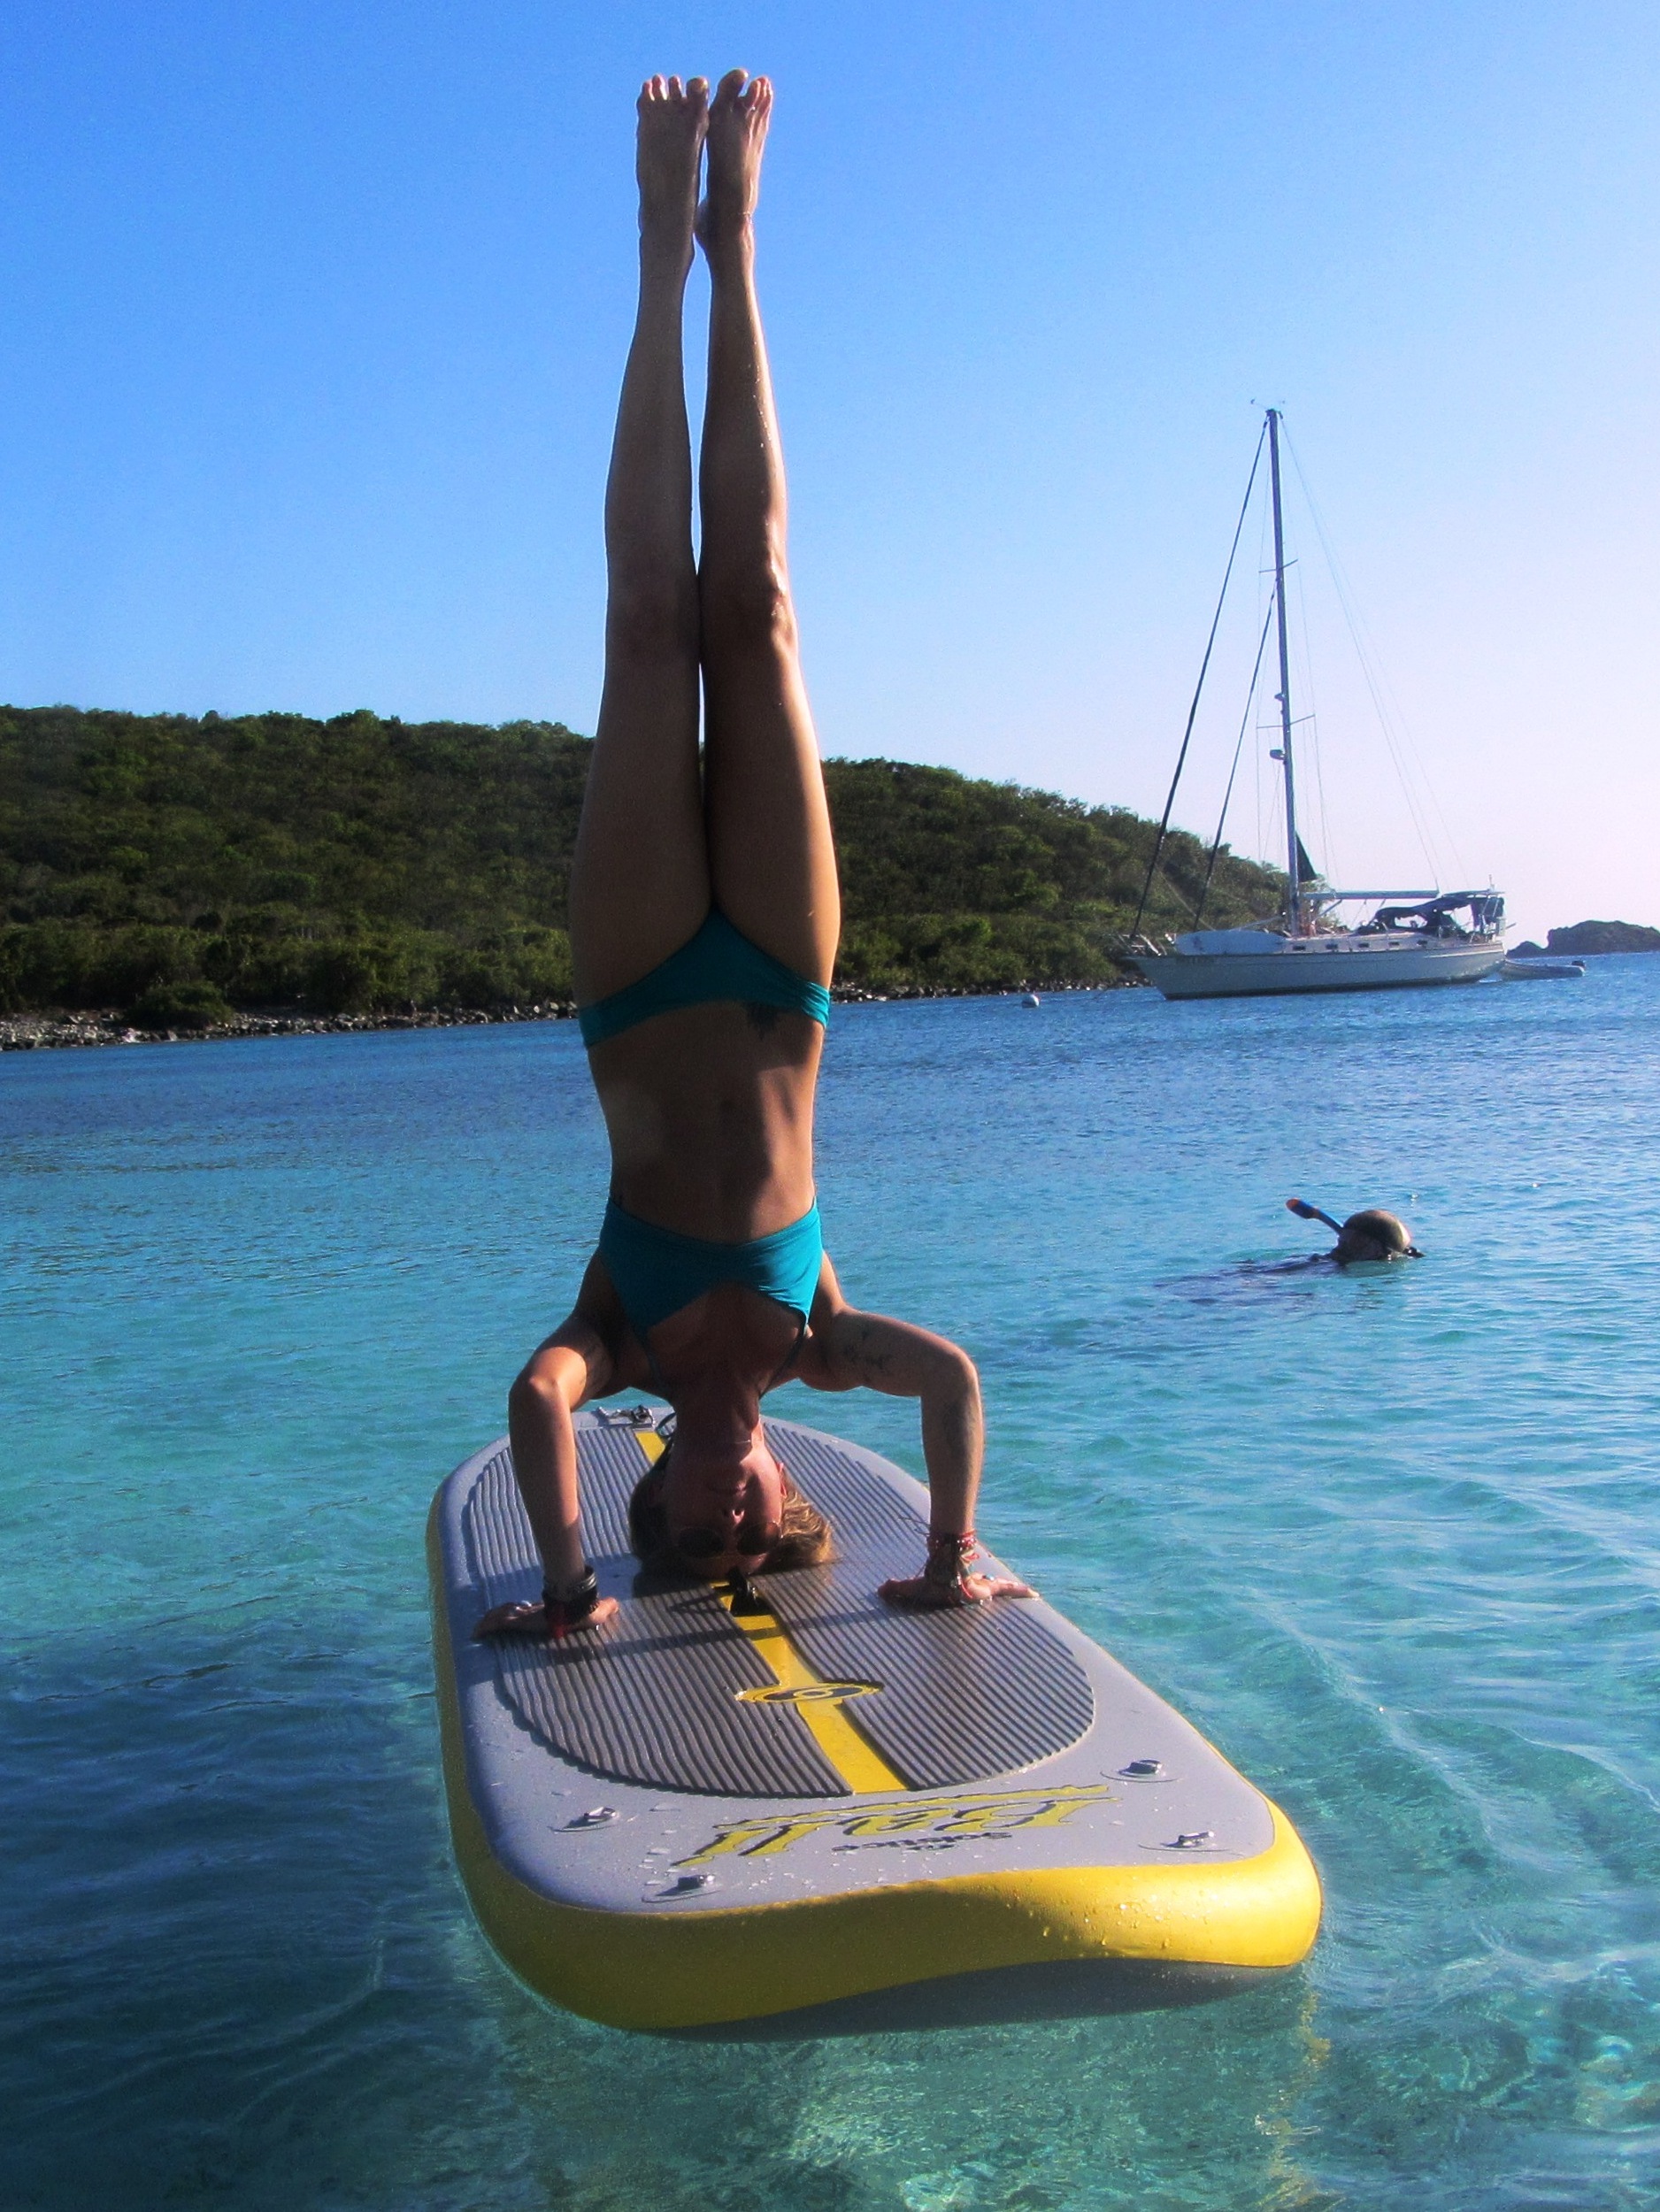 Have you ever done yoga on a SUP